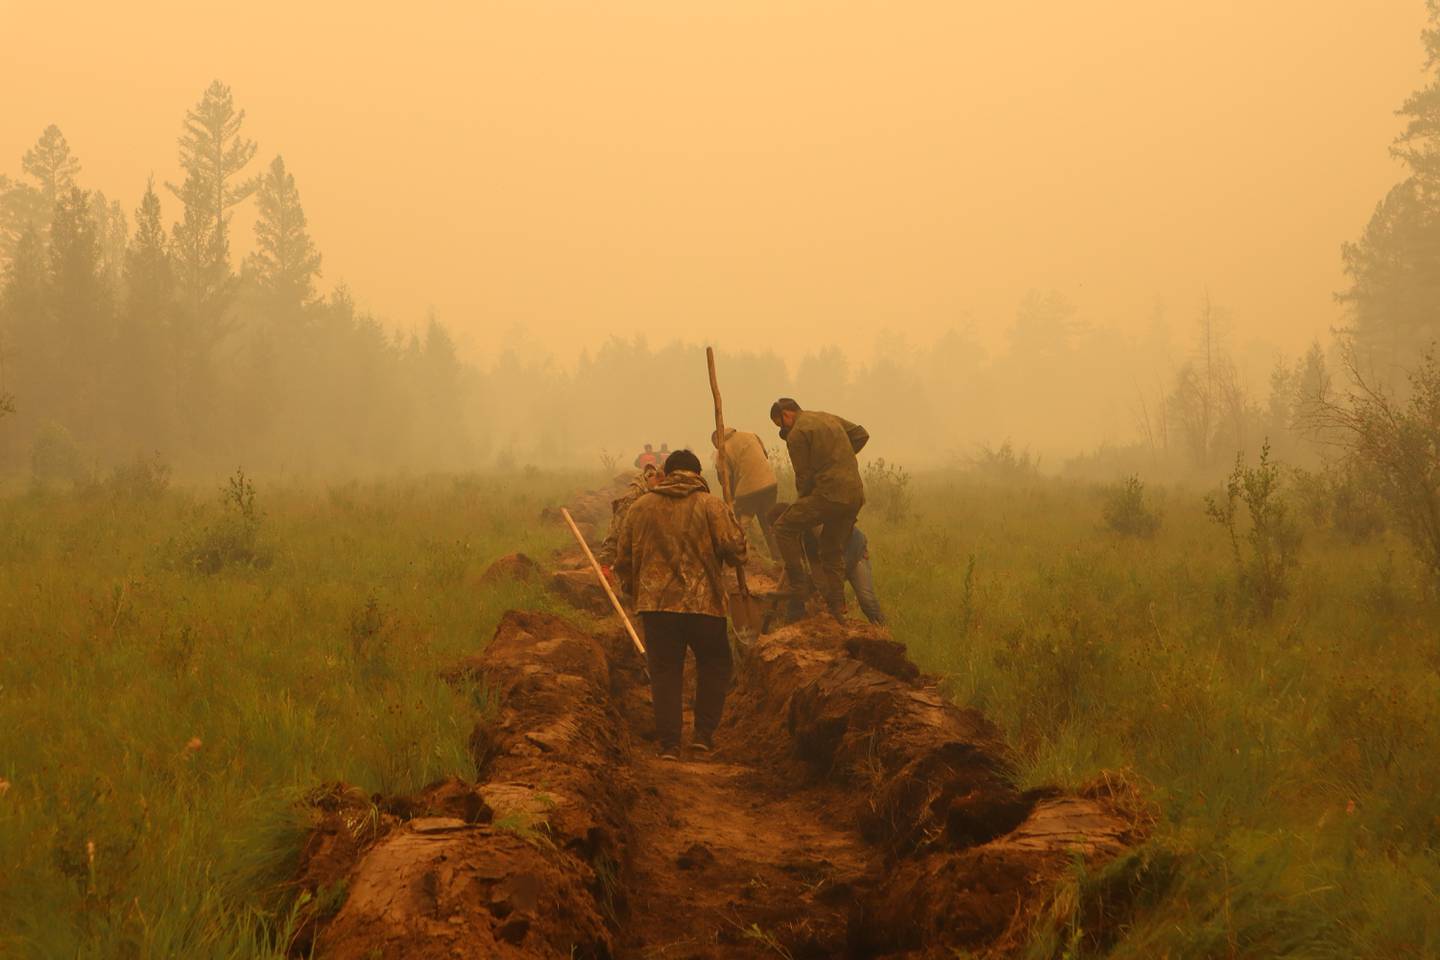 The world has seen many serious natural disasters in recent weeks, including forest fires. Reuters